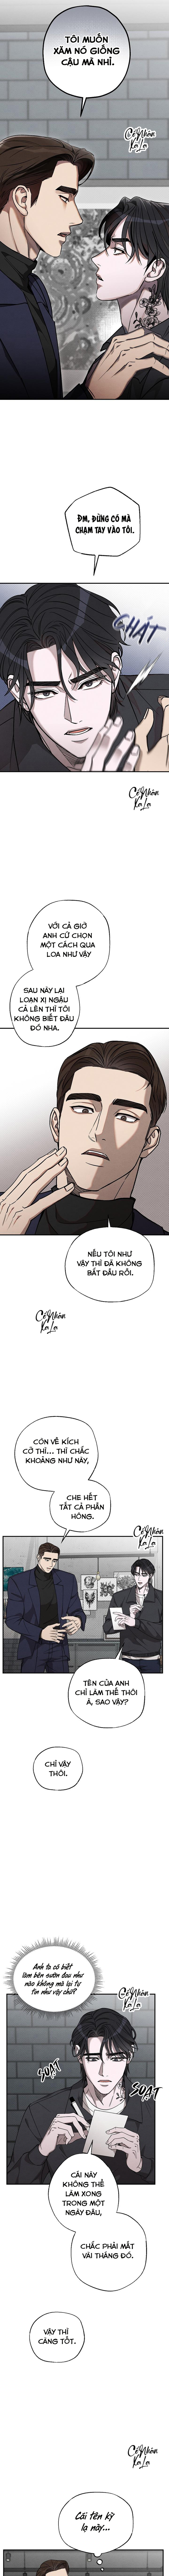 touch-up-chap-2-6